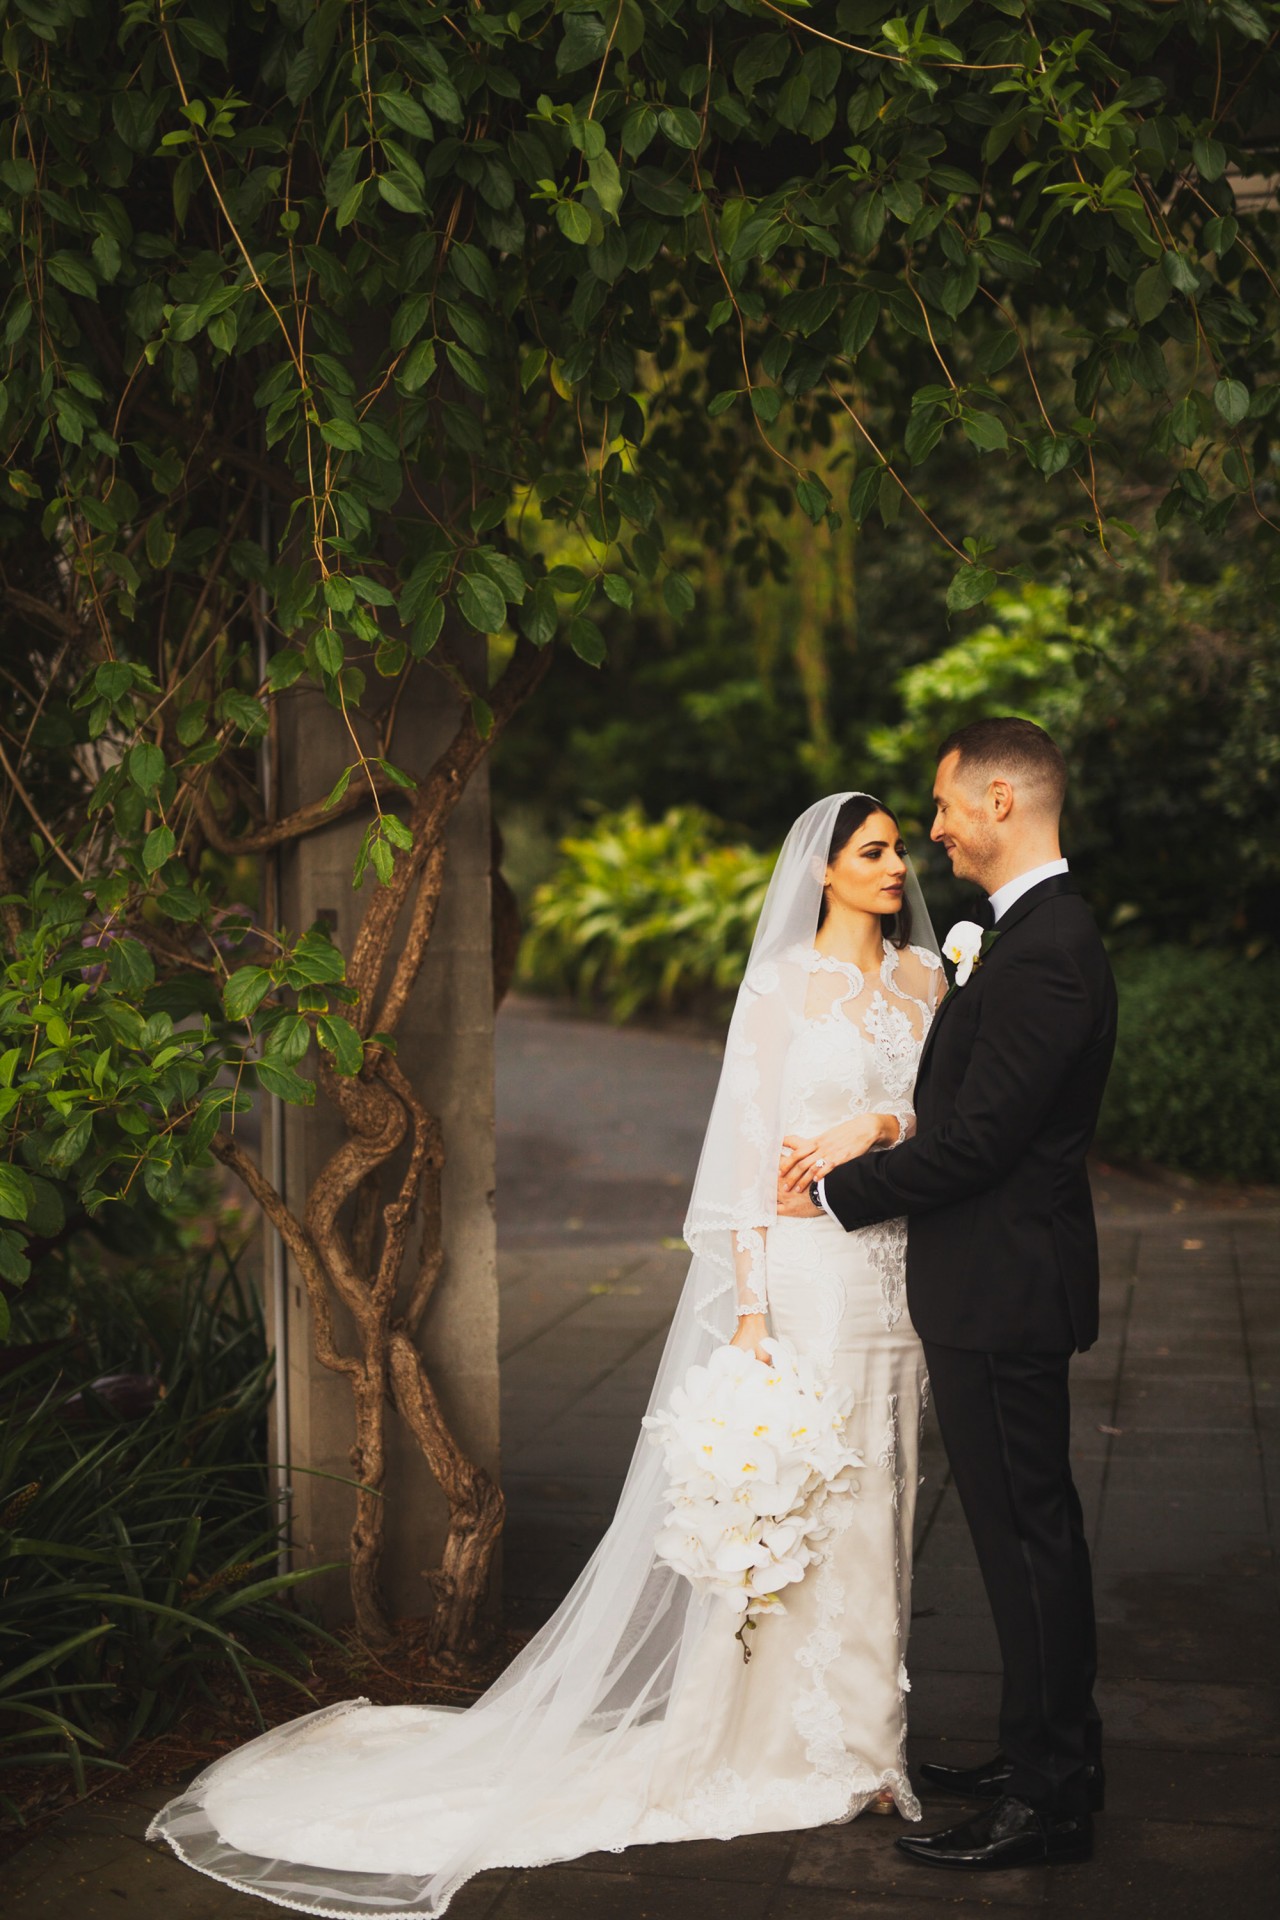 Tori and Tom incorporated their Buddhist beliefs into their white garden wedding. Image: 